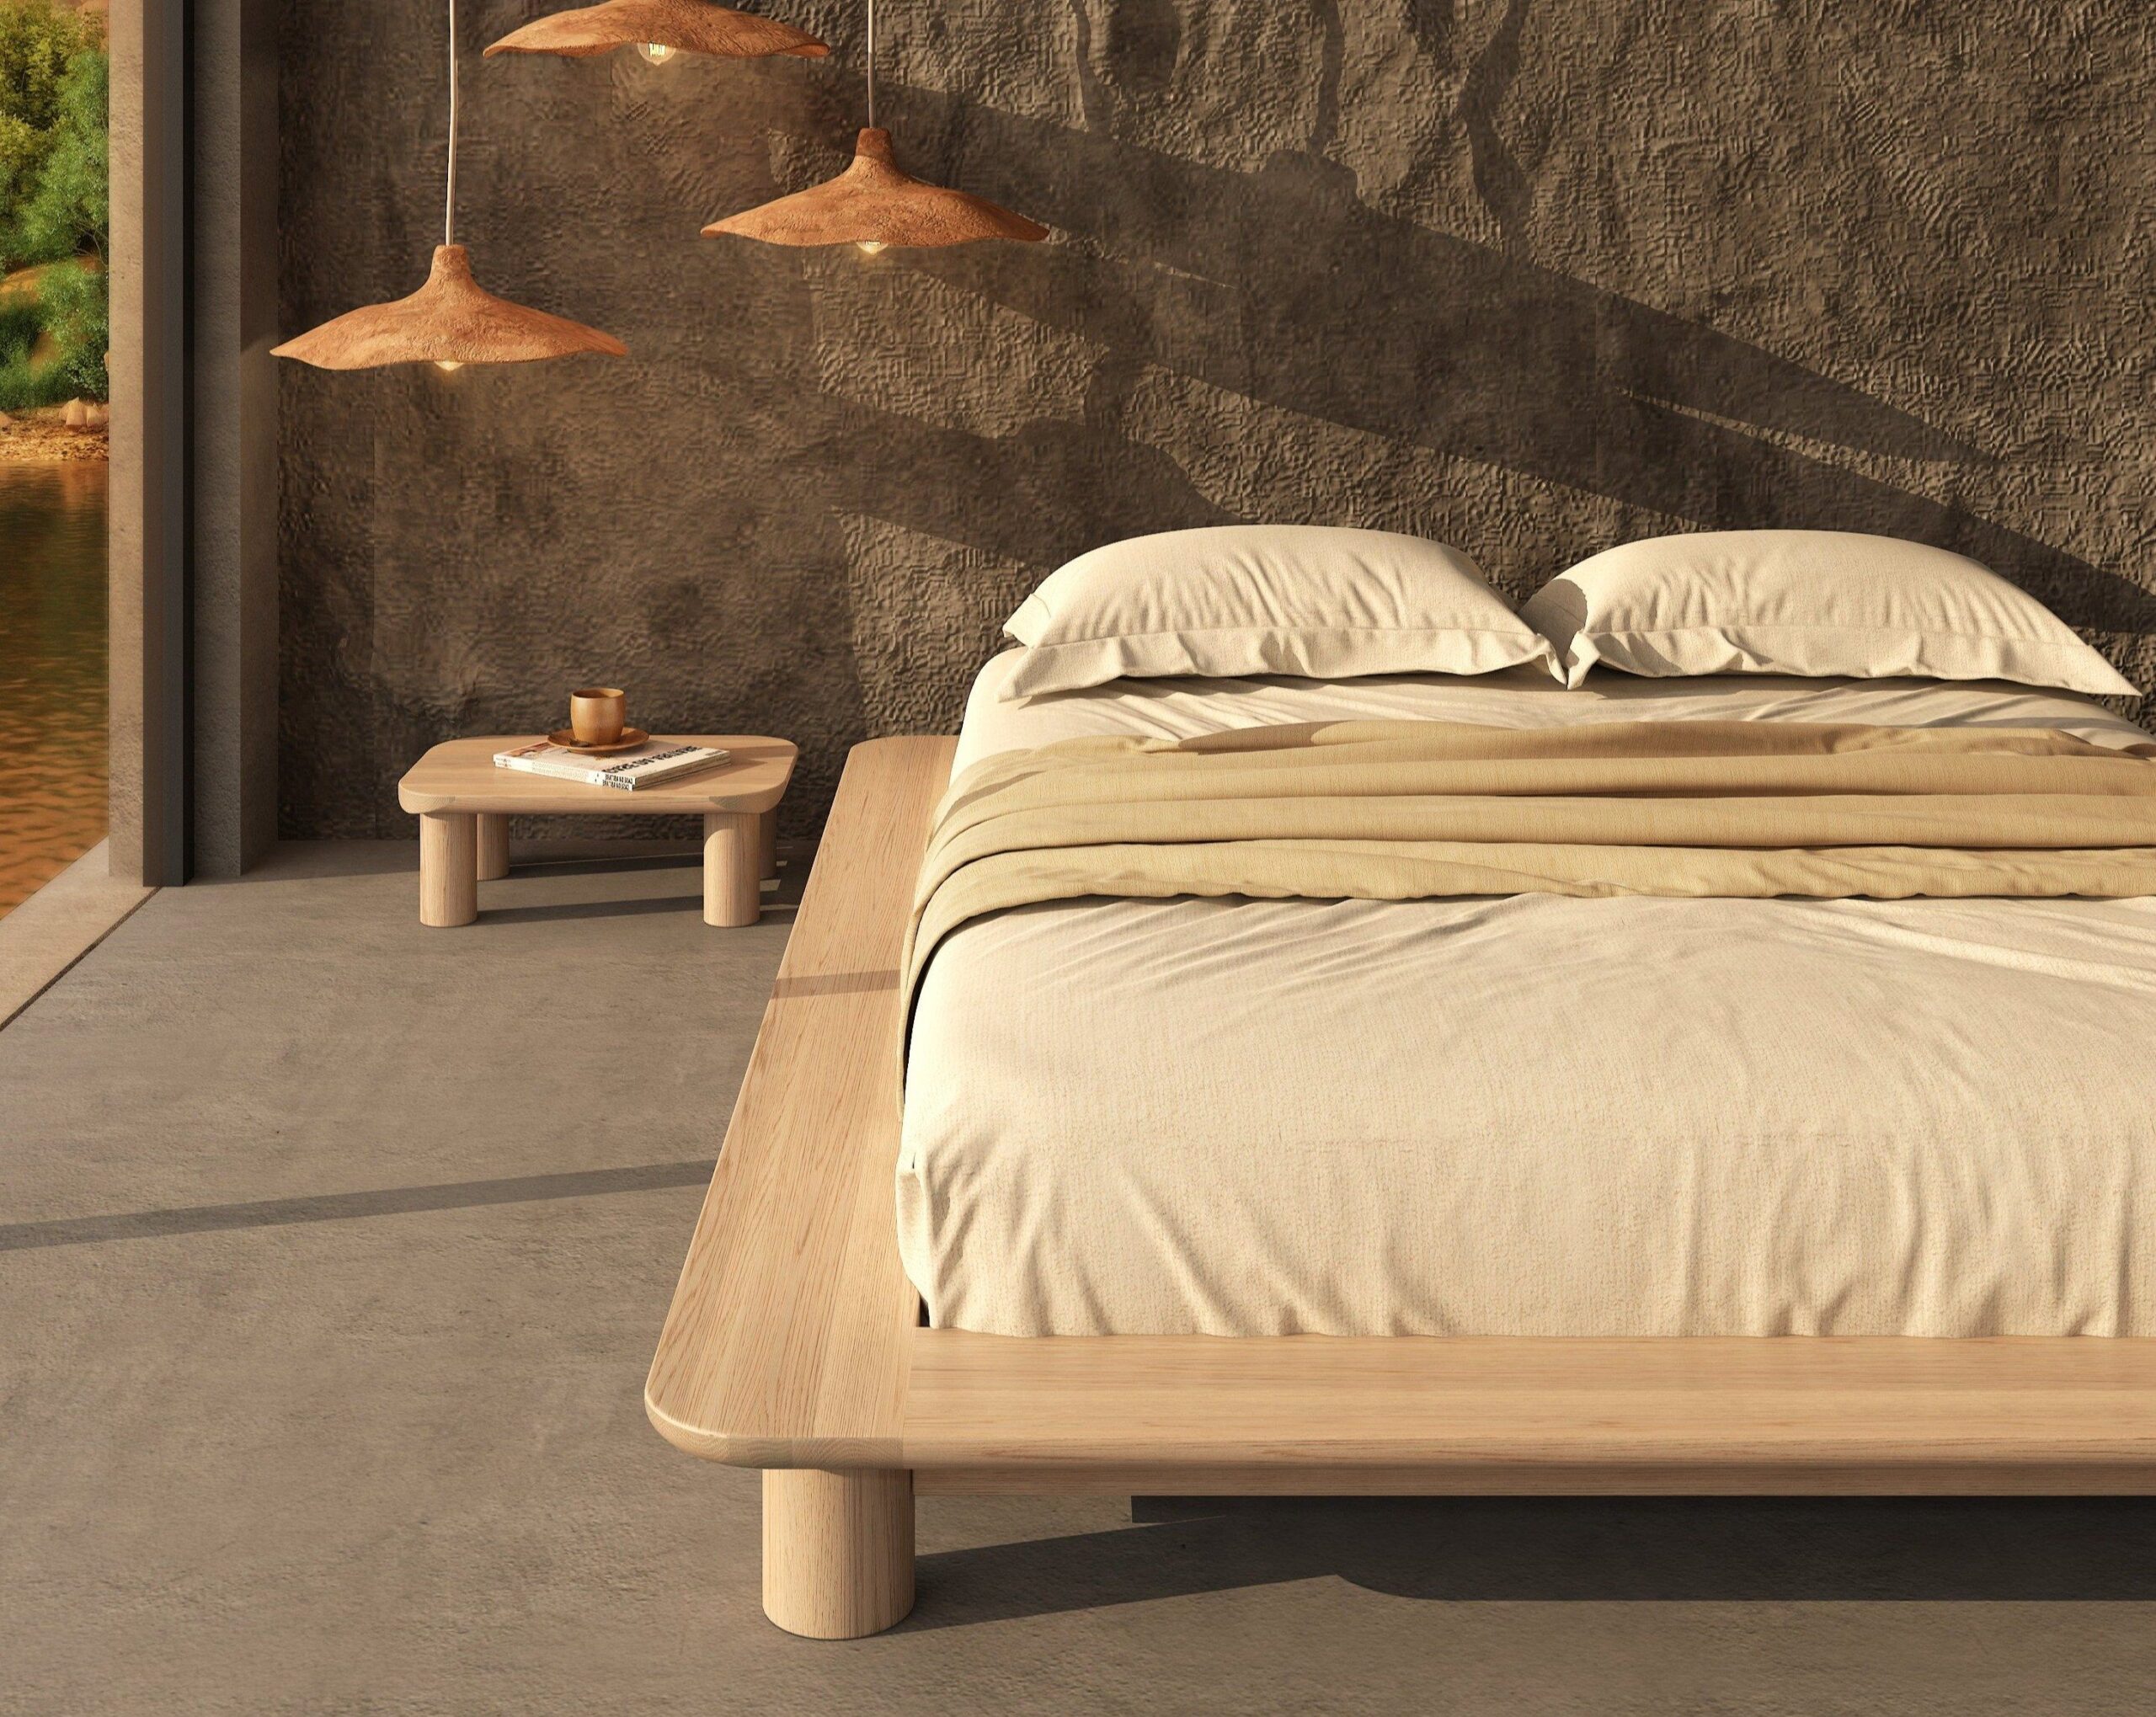 The Ultimate Guide to Platform Beds:
Styles, Materials, and Benefits